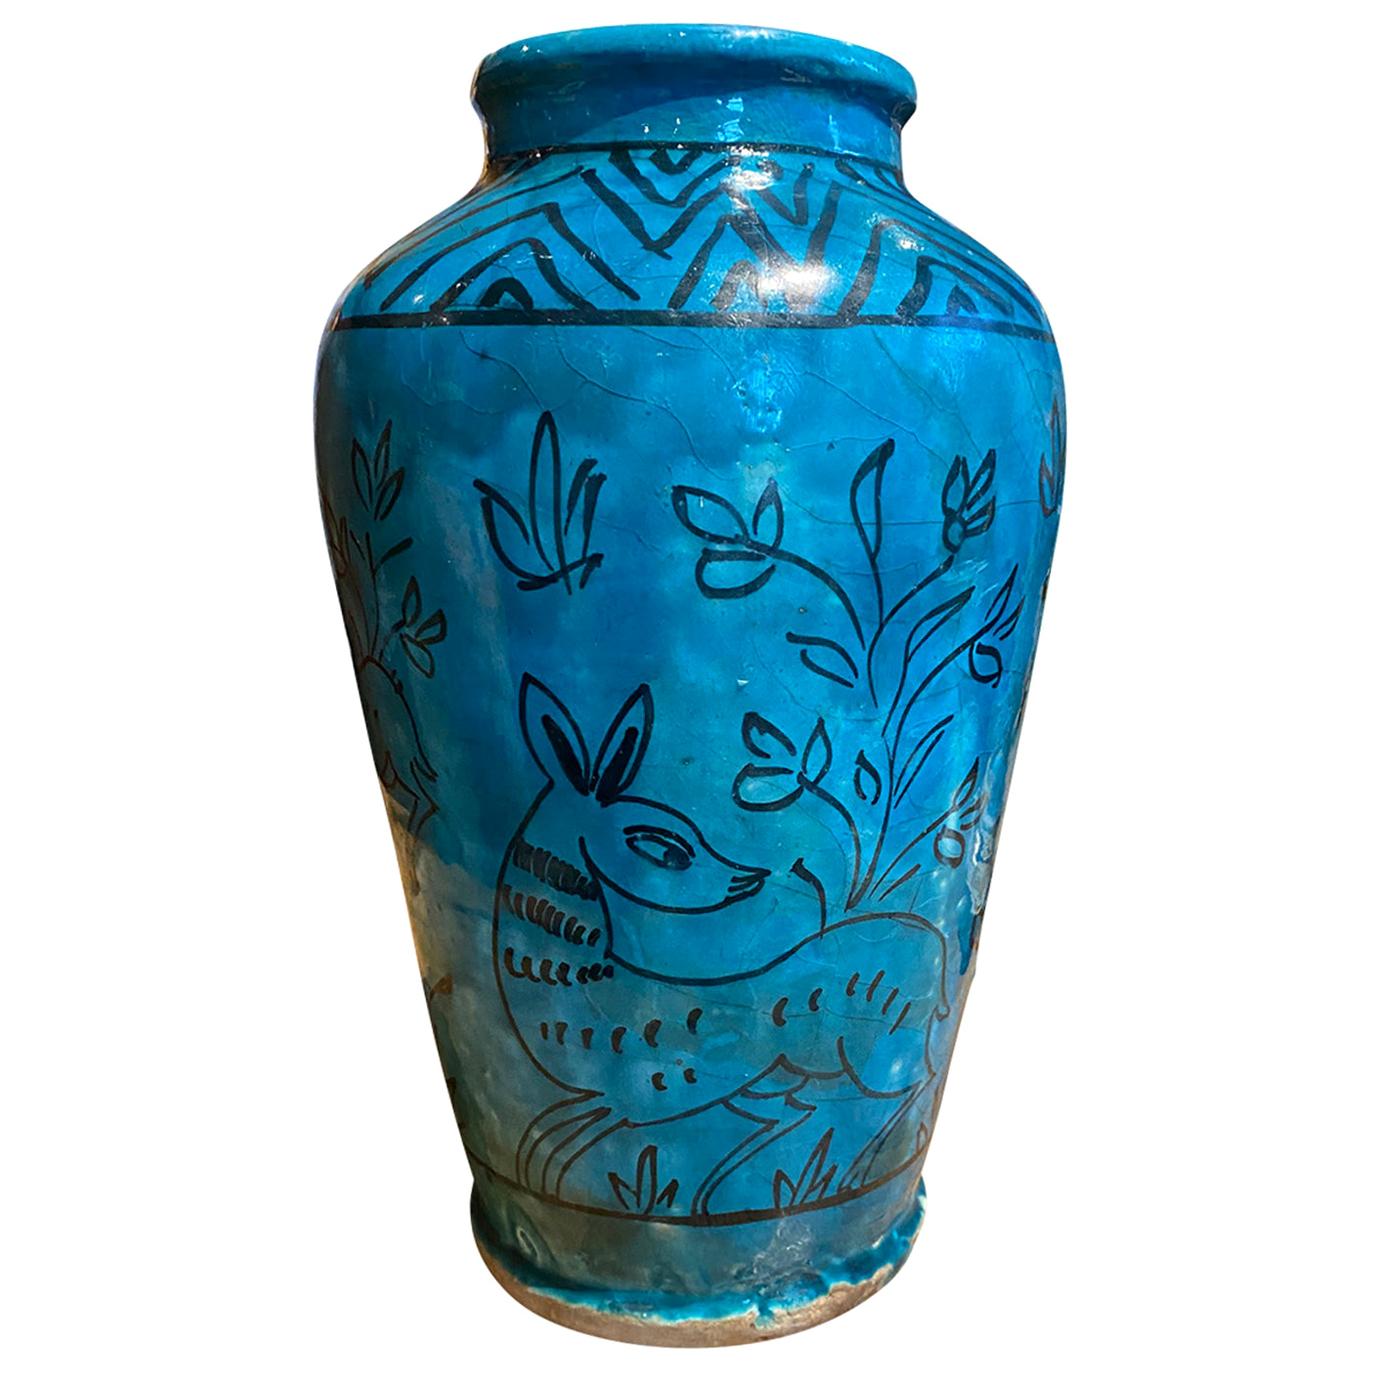 19th-20th Persian Century Blue Glazed Pottery Jar/Vase with Does